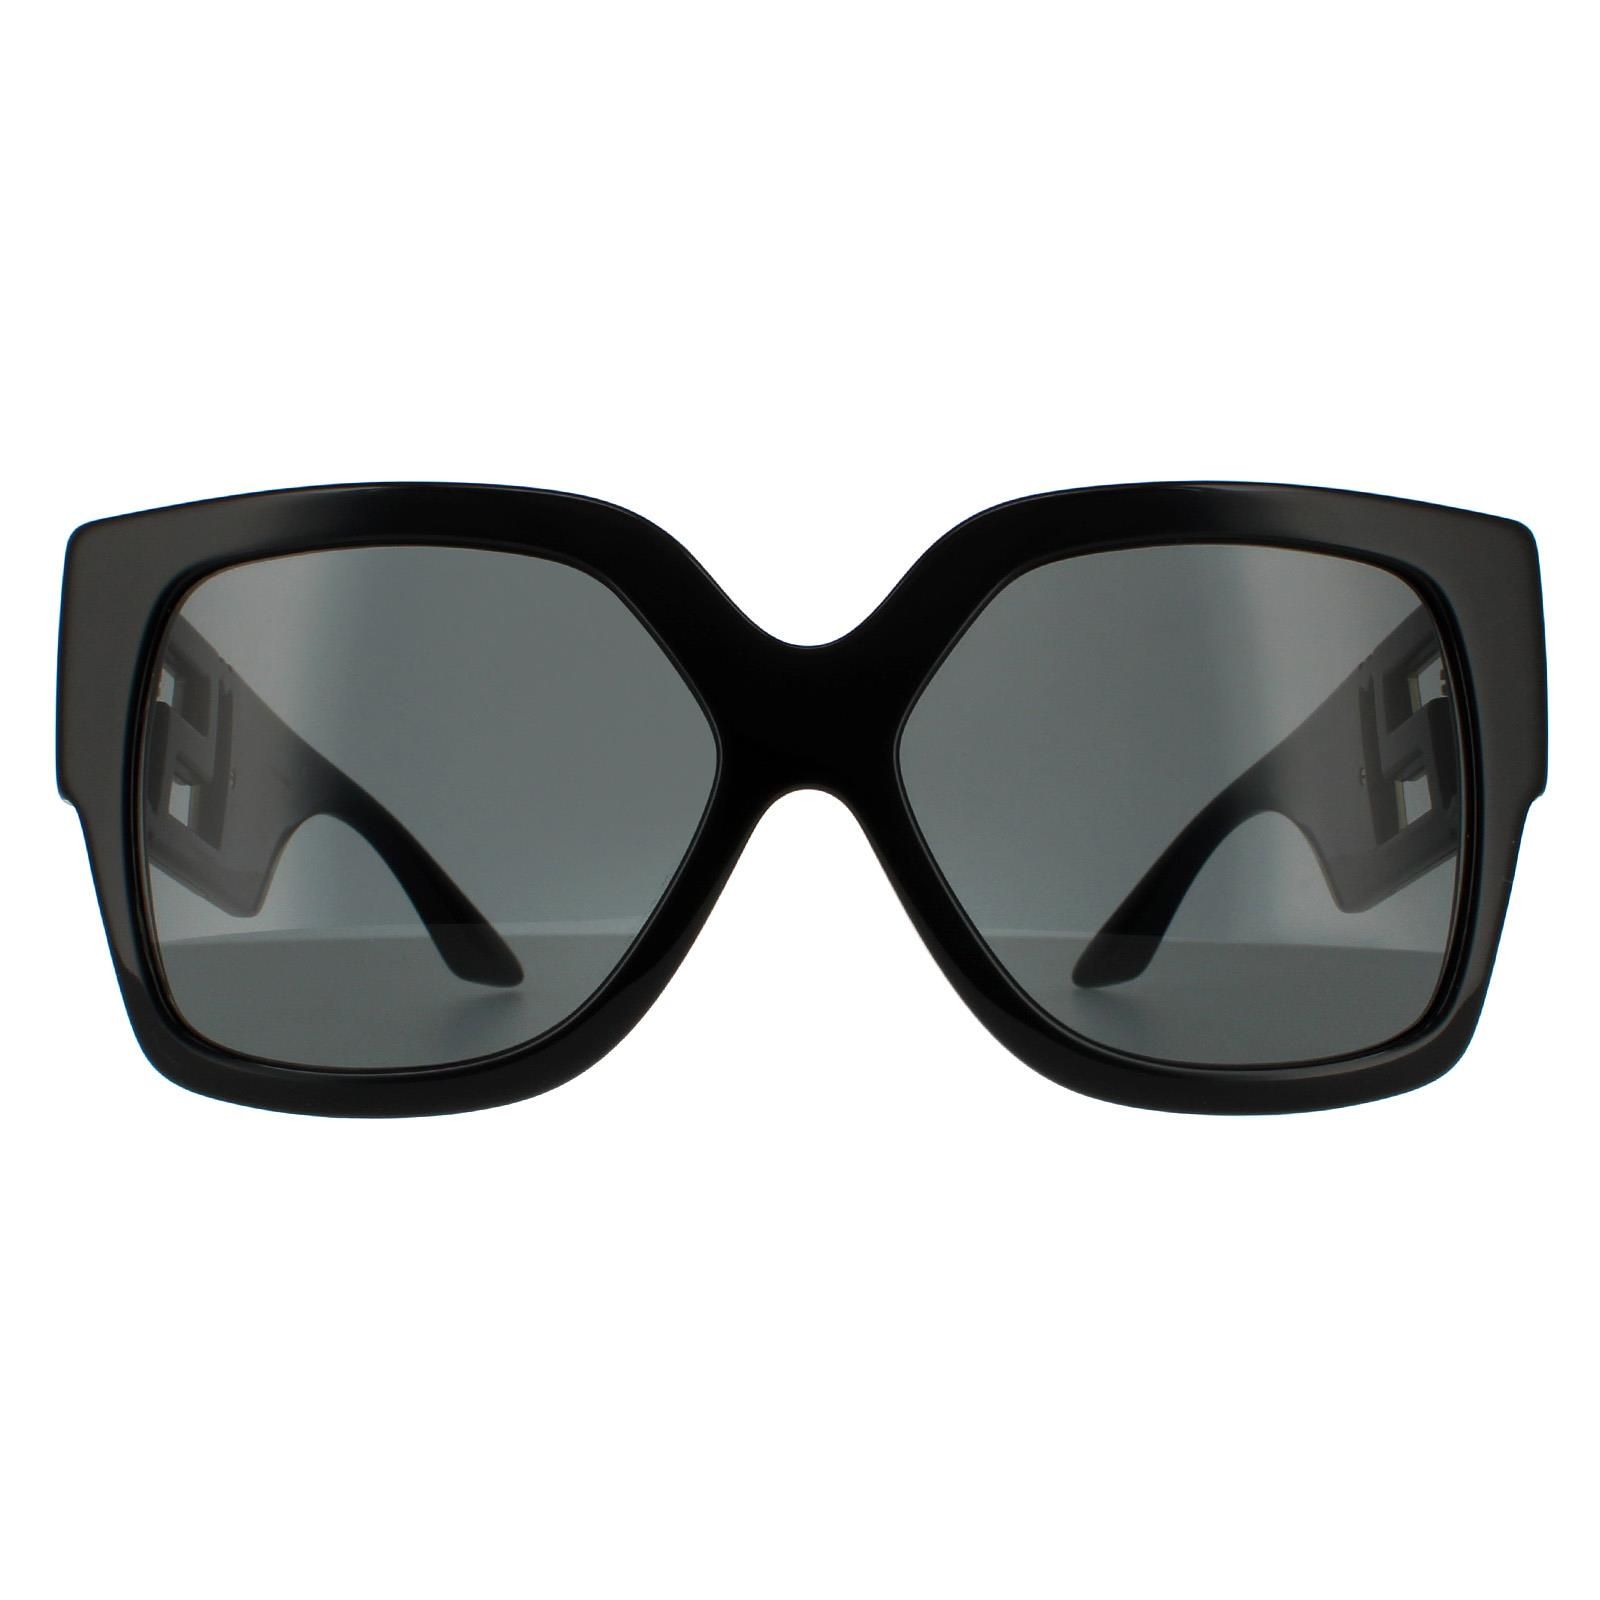 Versace Square Womens Black Dark Grey Sunglasses VE4402 are an eye-catching oversized square design crafted from chunky yet lightweight acetate. Wide temples are embellished with large metal Greca logos with laser cut Versace branding for authenticity.